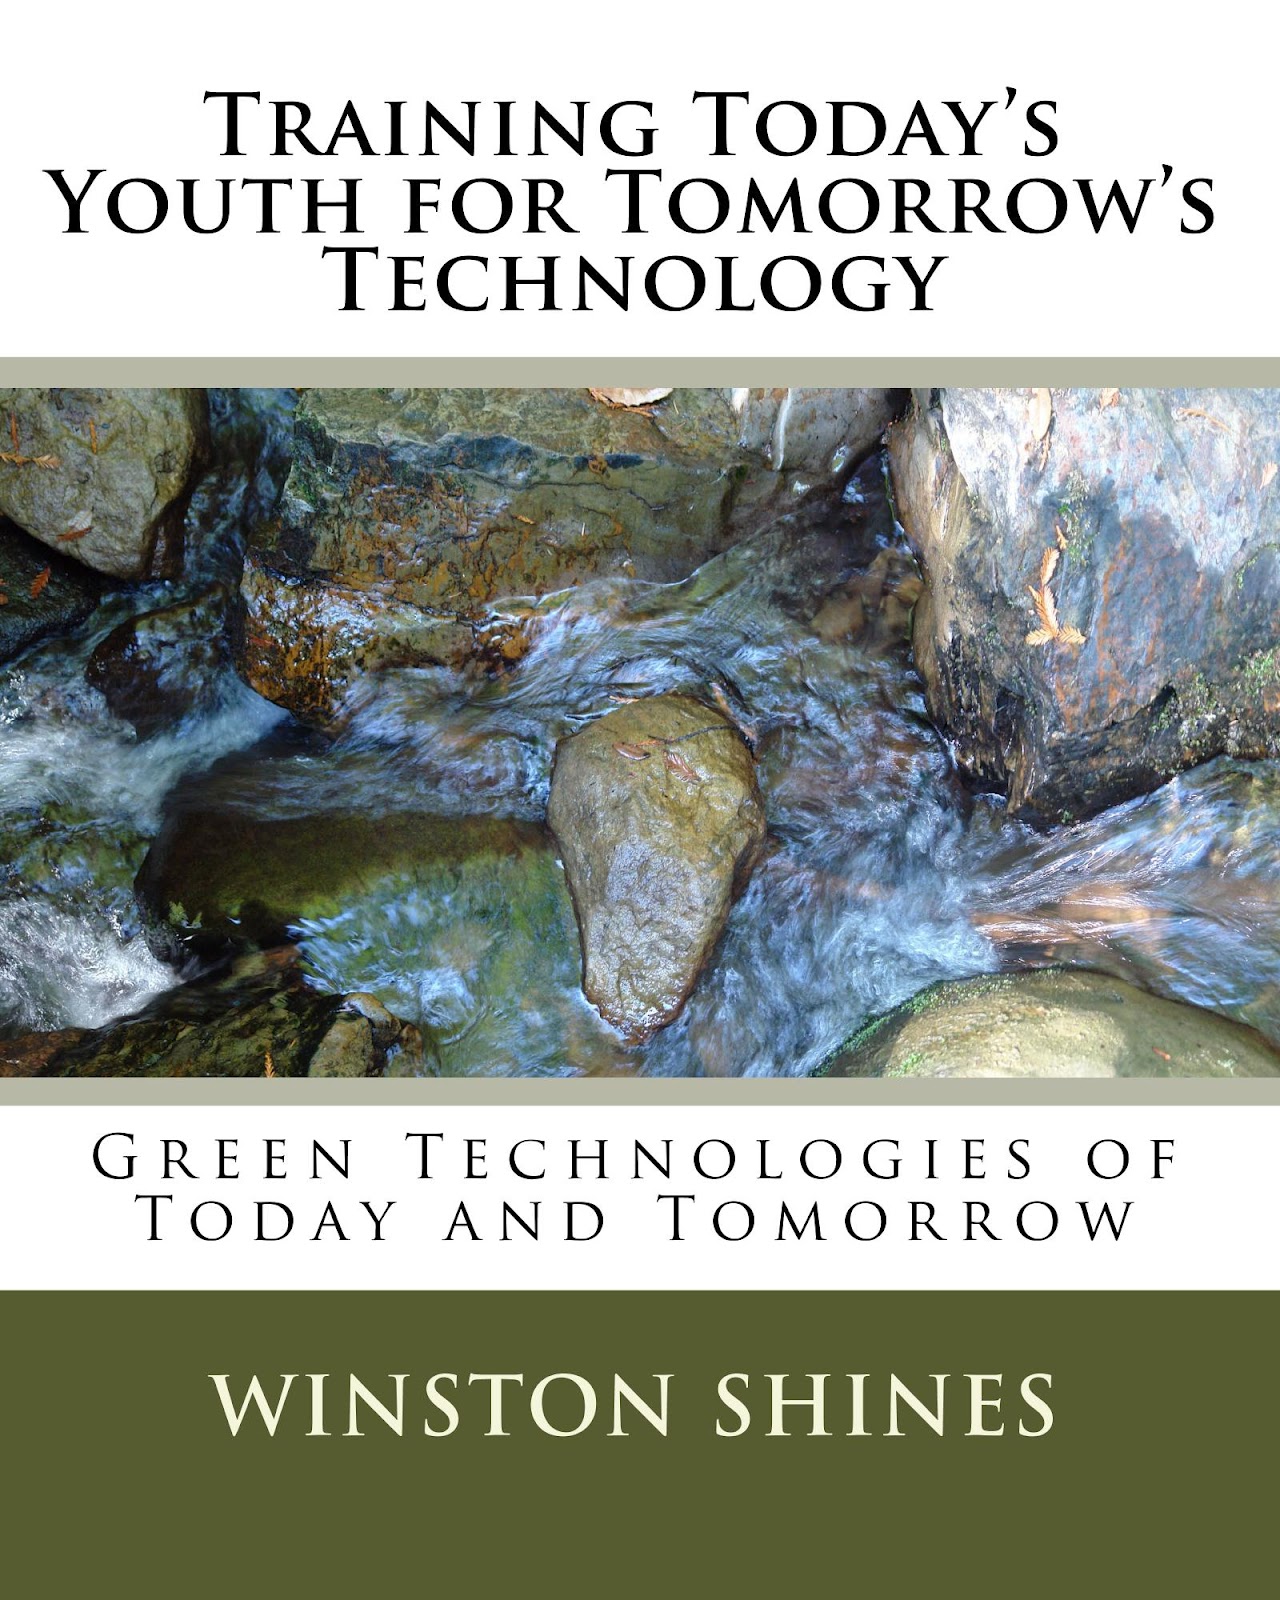 Training Today s Youth for Tomorrow s Technology can now be ordered online in the UK from the UK Amazon website